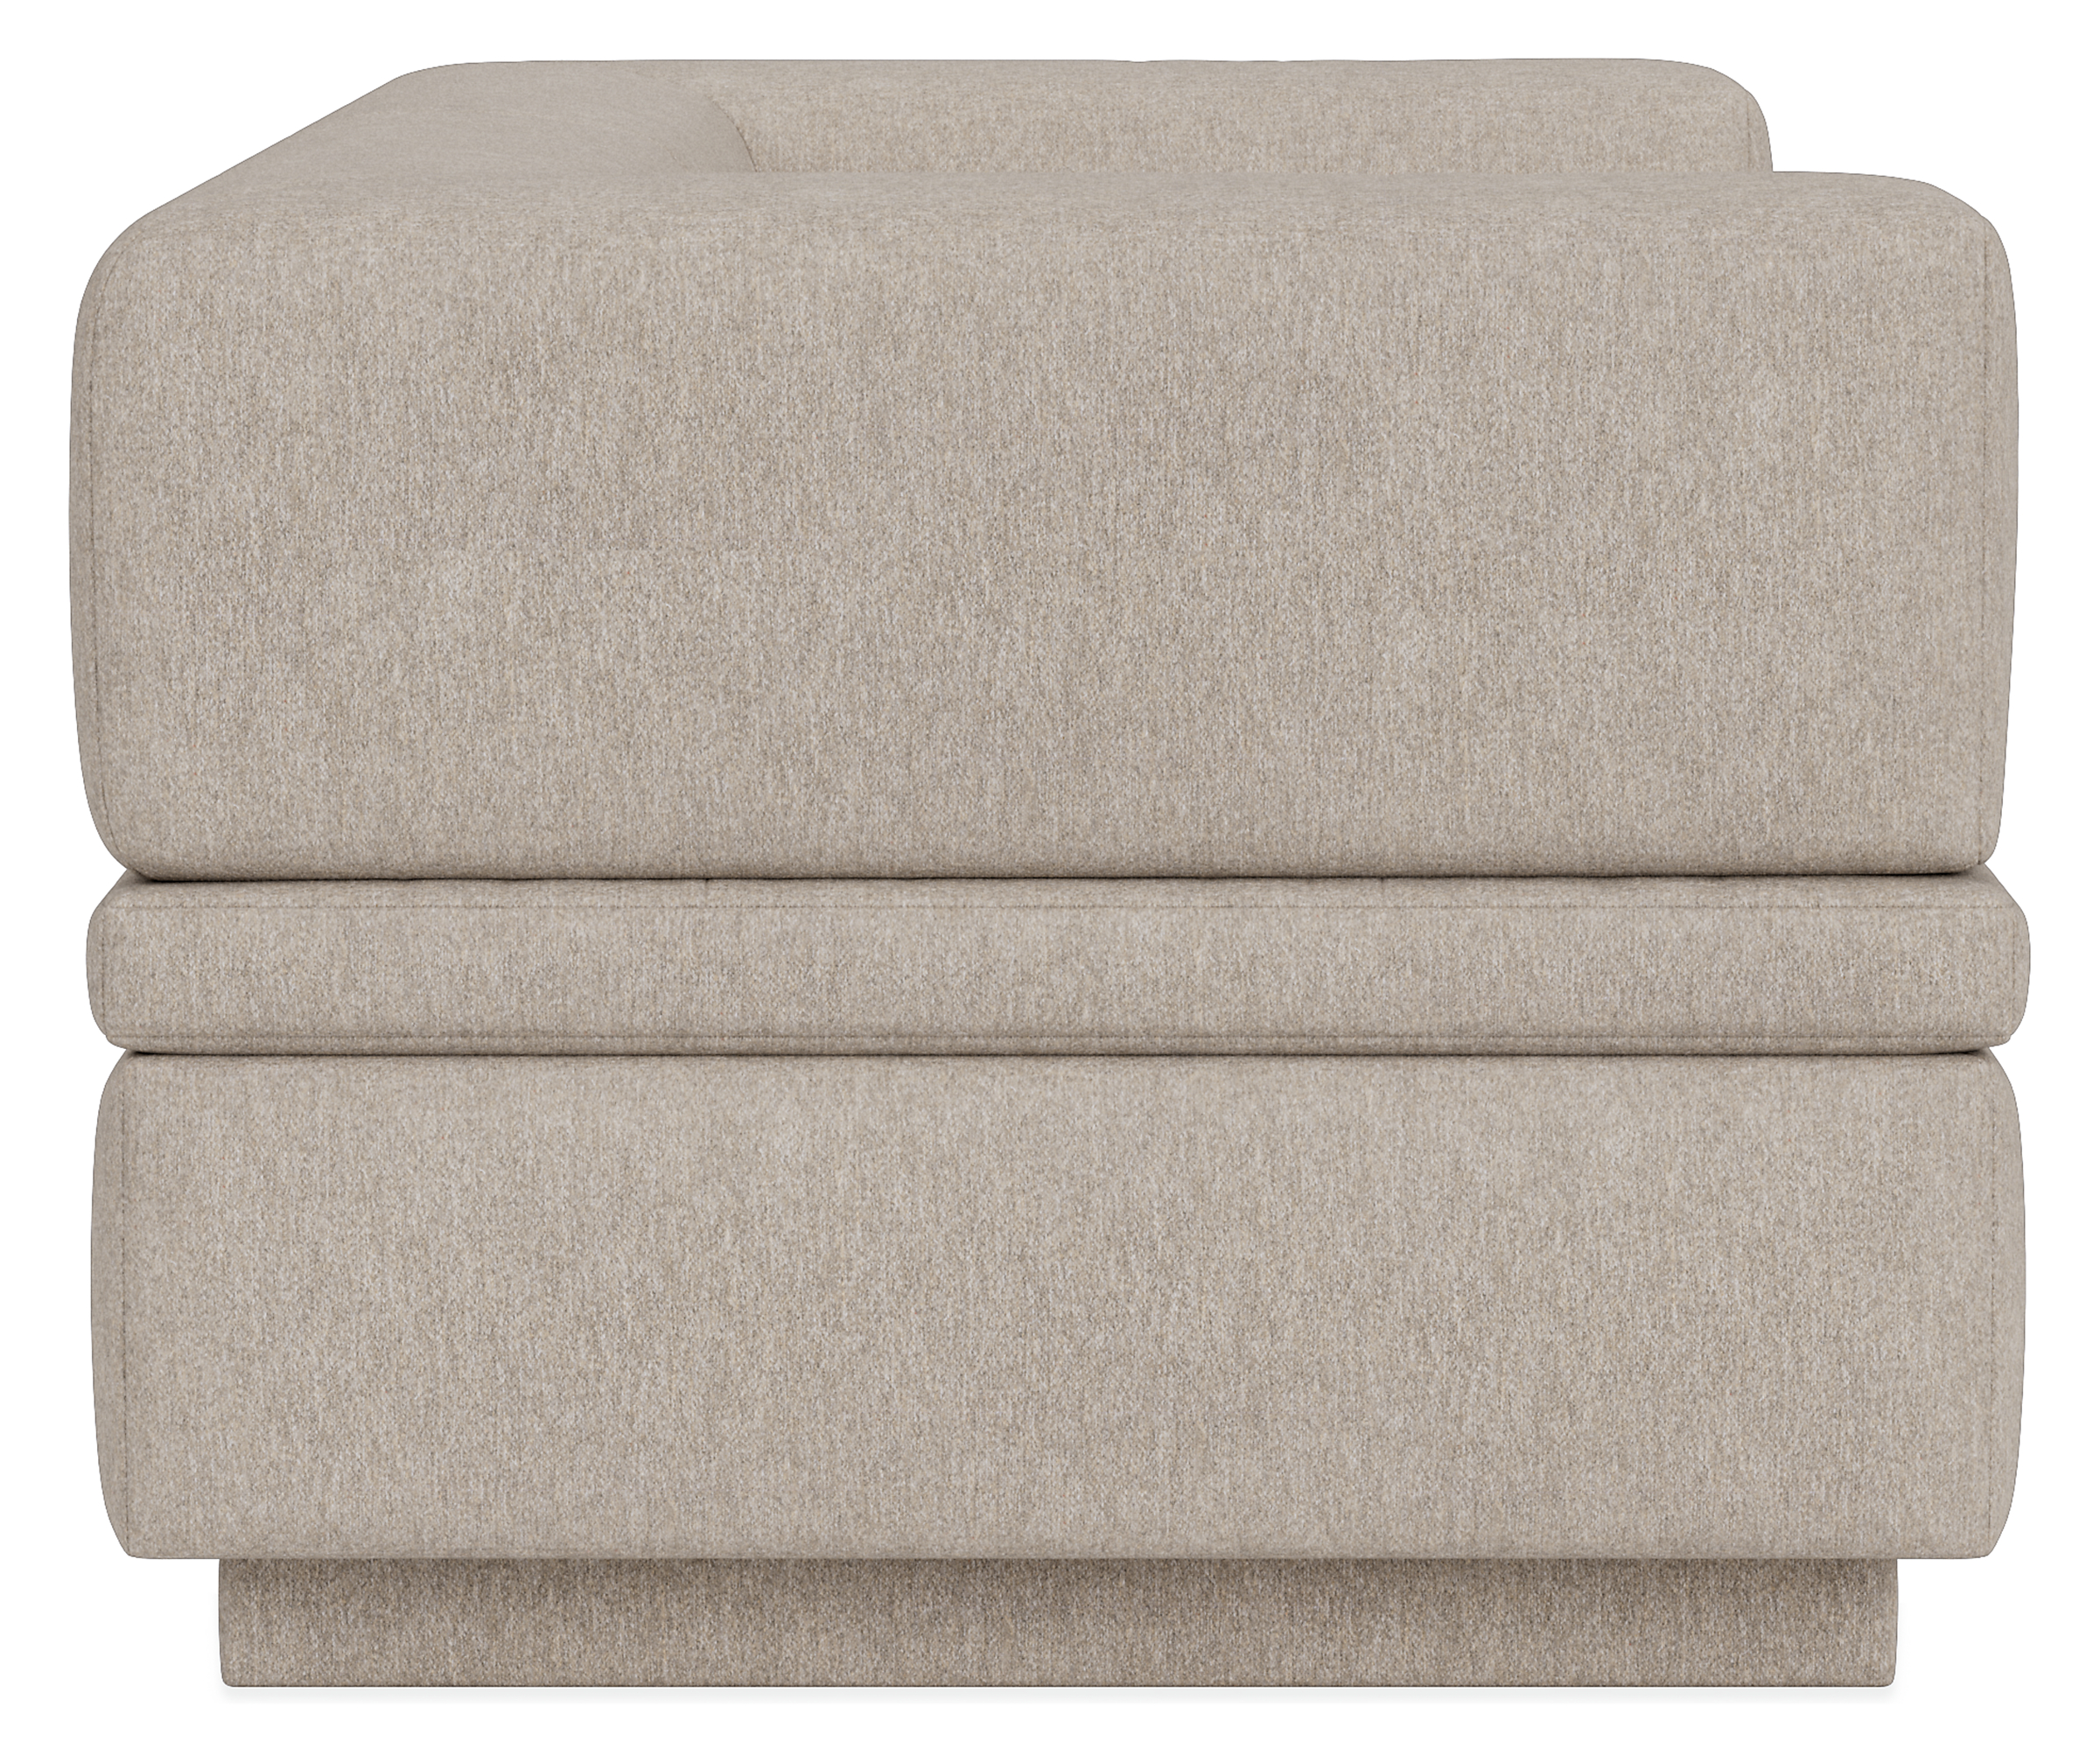 Side view of Miranda 76-inches Daybed with Sofa Cushions in Elin Fabric.